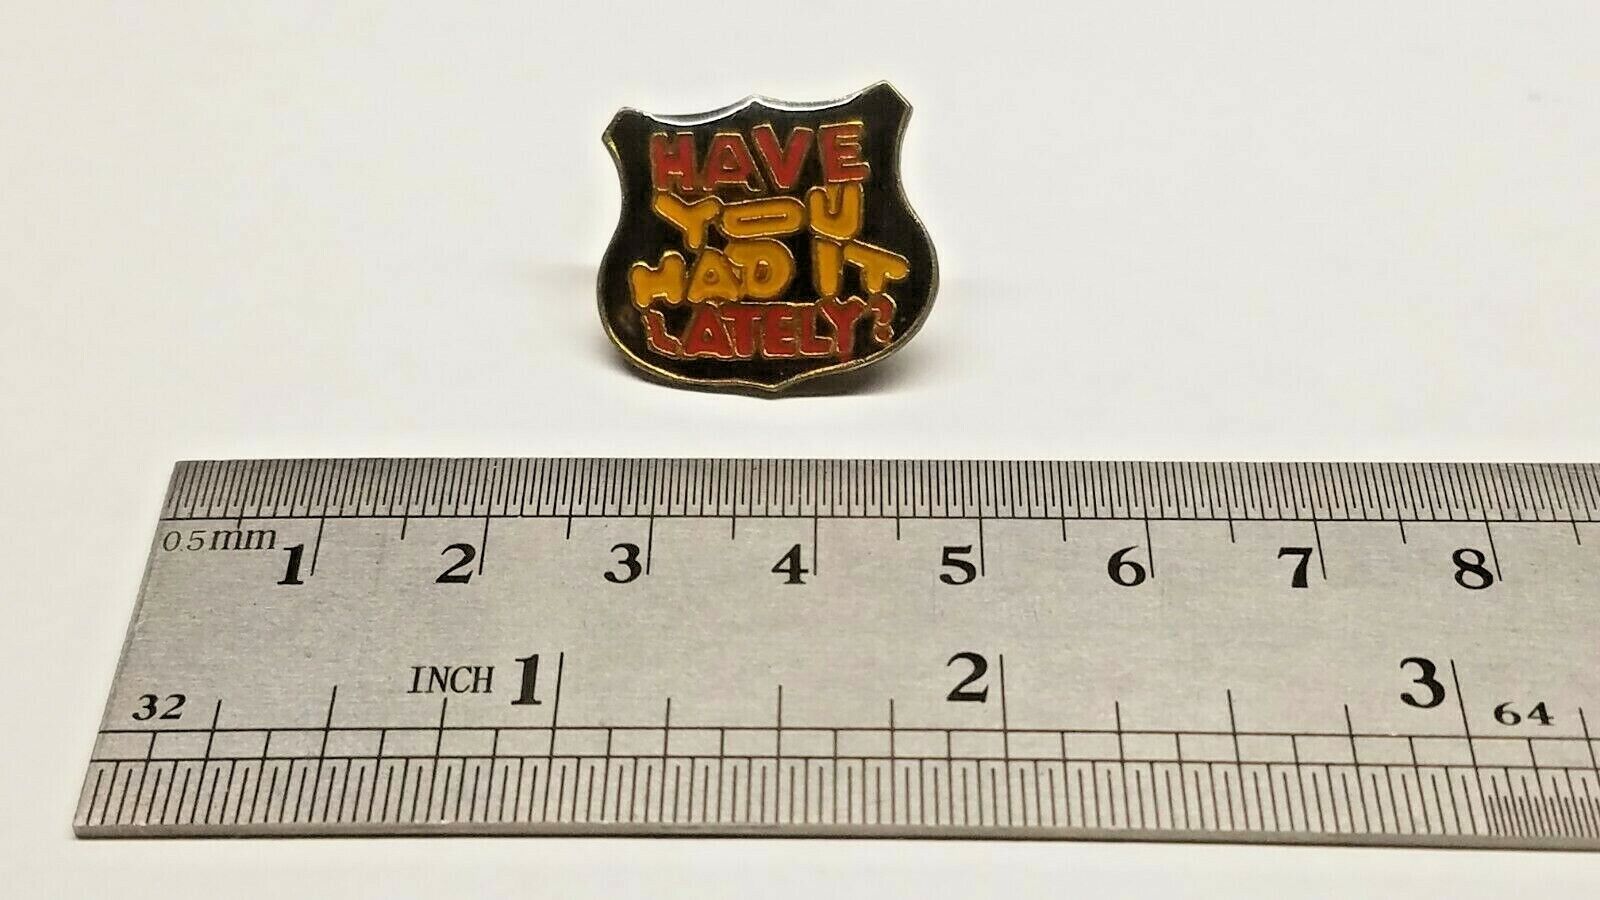 Vintage HAVE YOU HAD IT LATELY humorous funny hat / lapel pin 1970's / 1980's